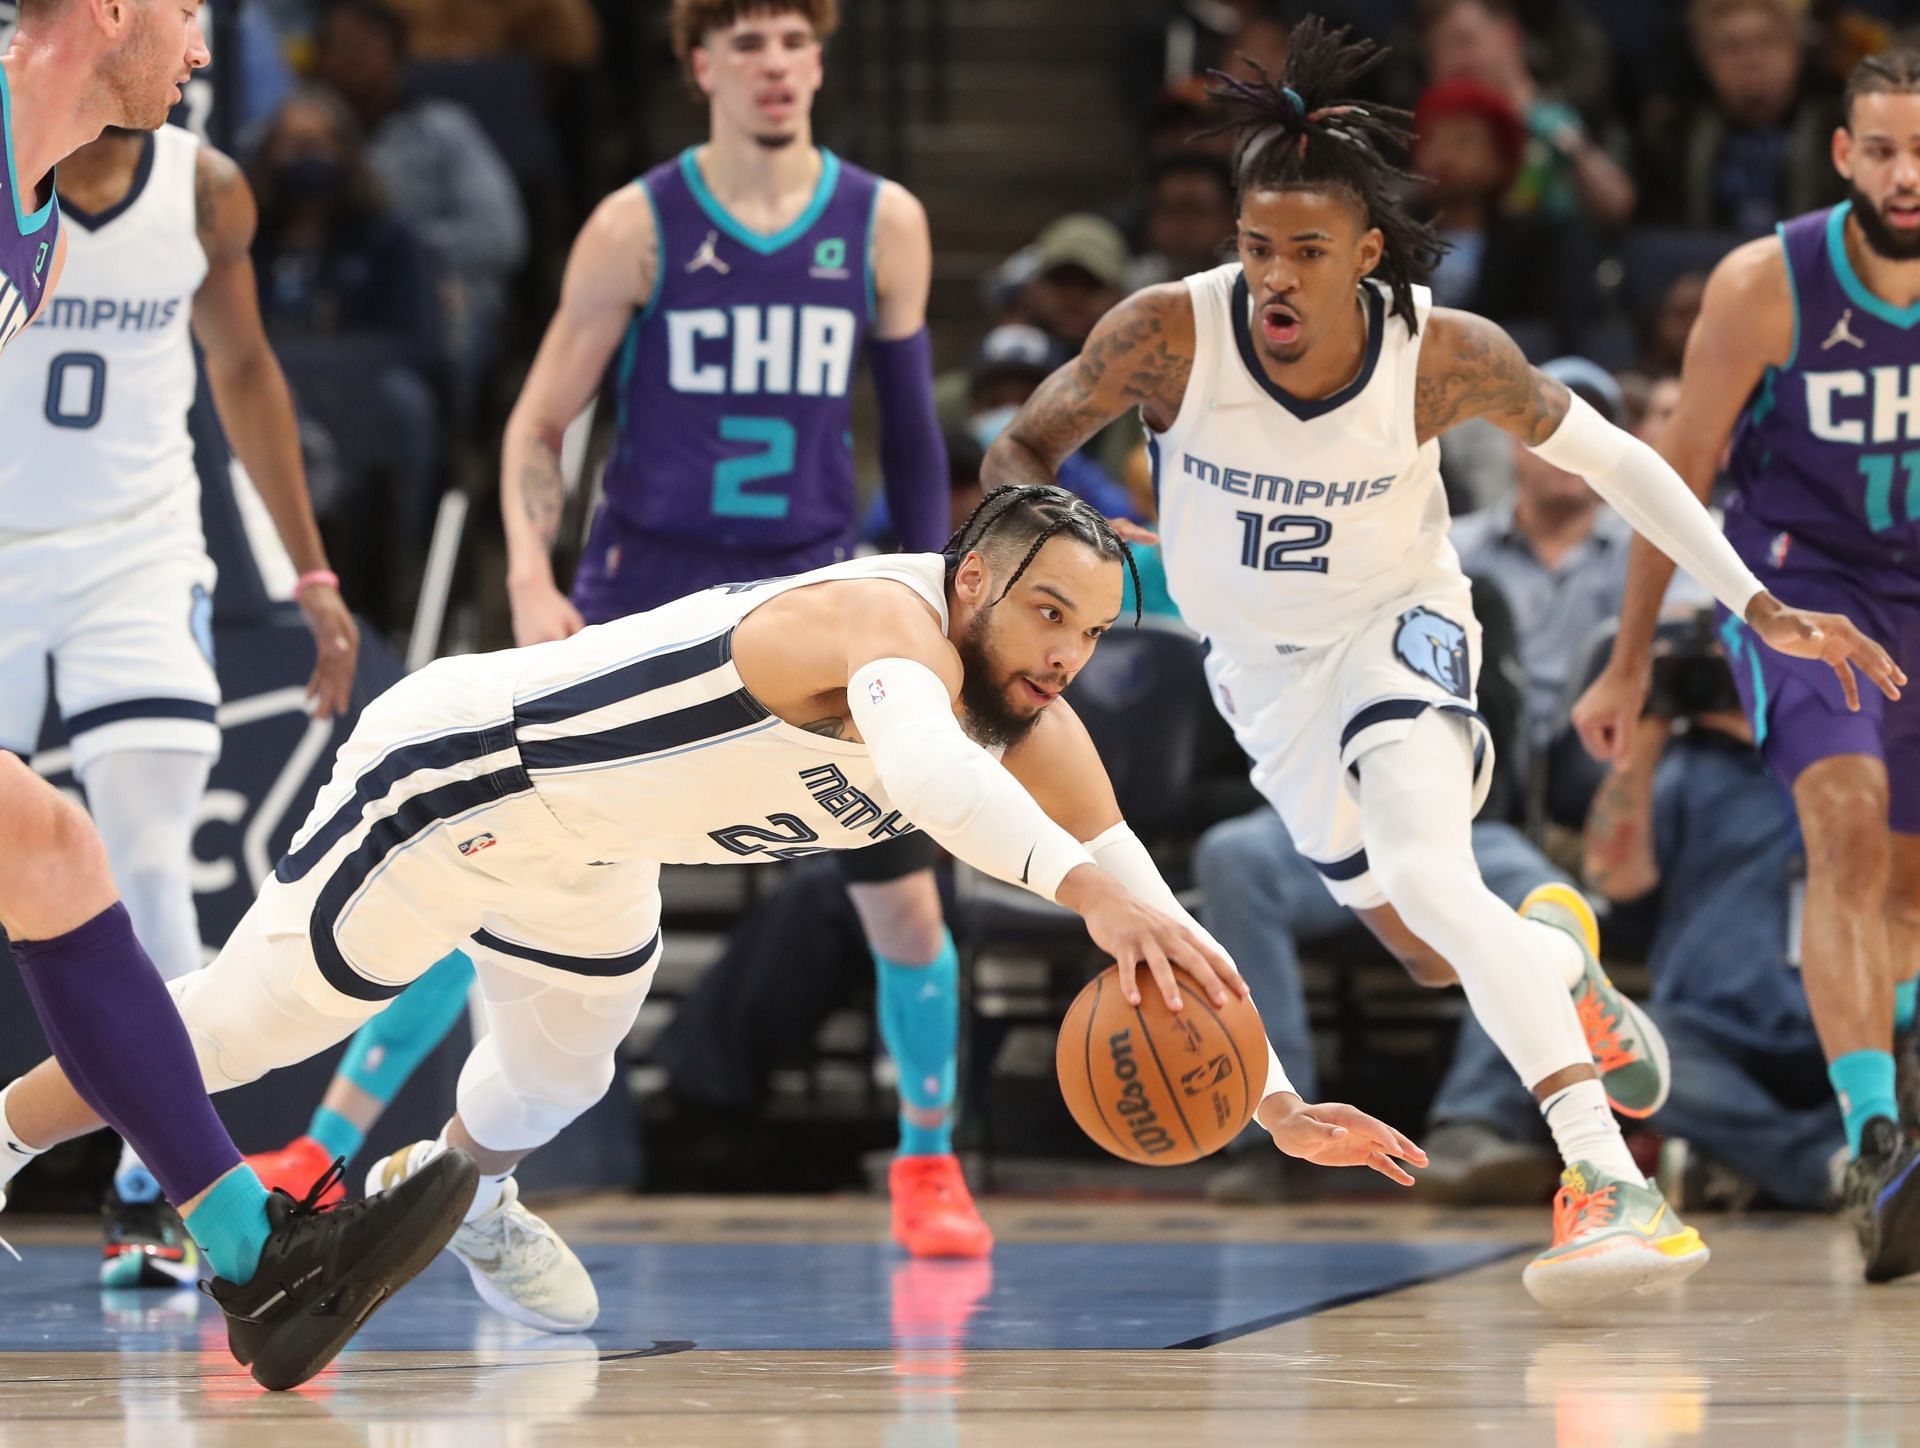 The Memphis Grizzlies has the worst defense in the NBA right now [Photo: The Commercial Appeal]